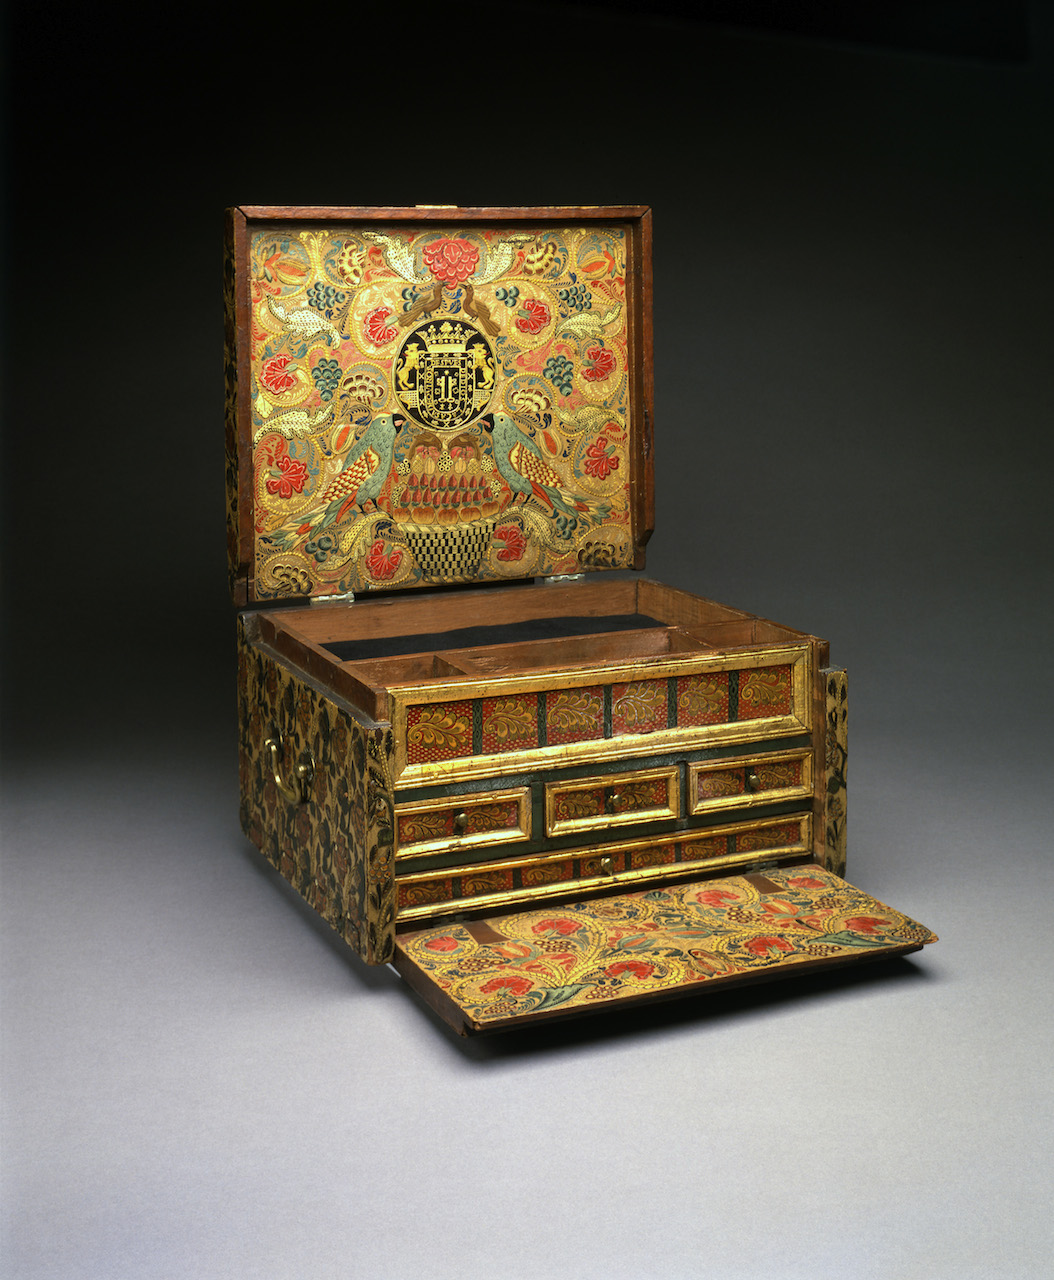 Portable writing desk (about 1684), wood, varniz de pasto, silver fittings (on loan from the Hispanic Society of America in NYC, courtesy Museum of Fine Arts, Boston)